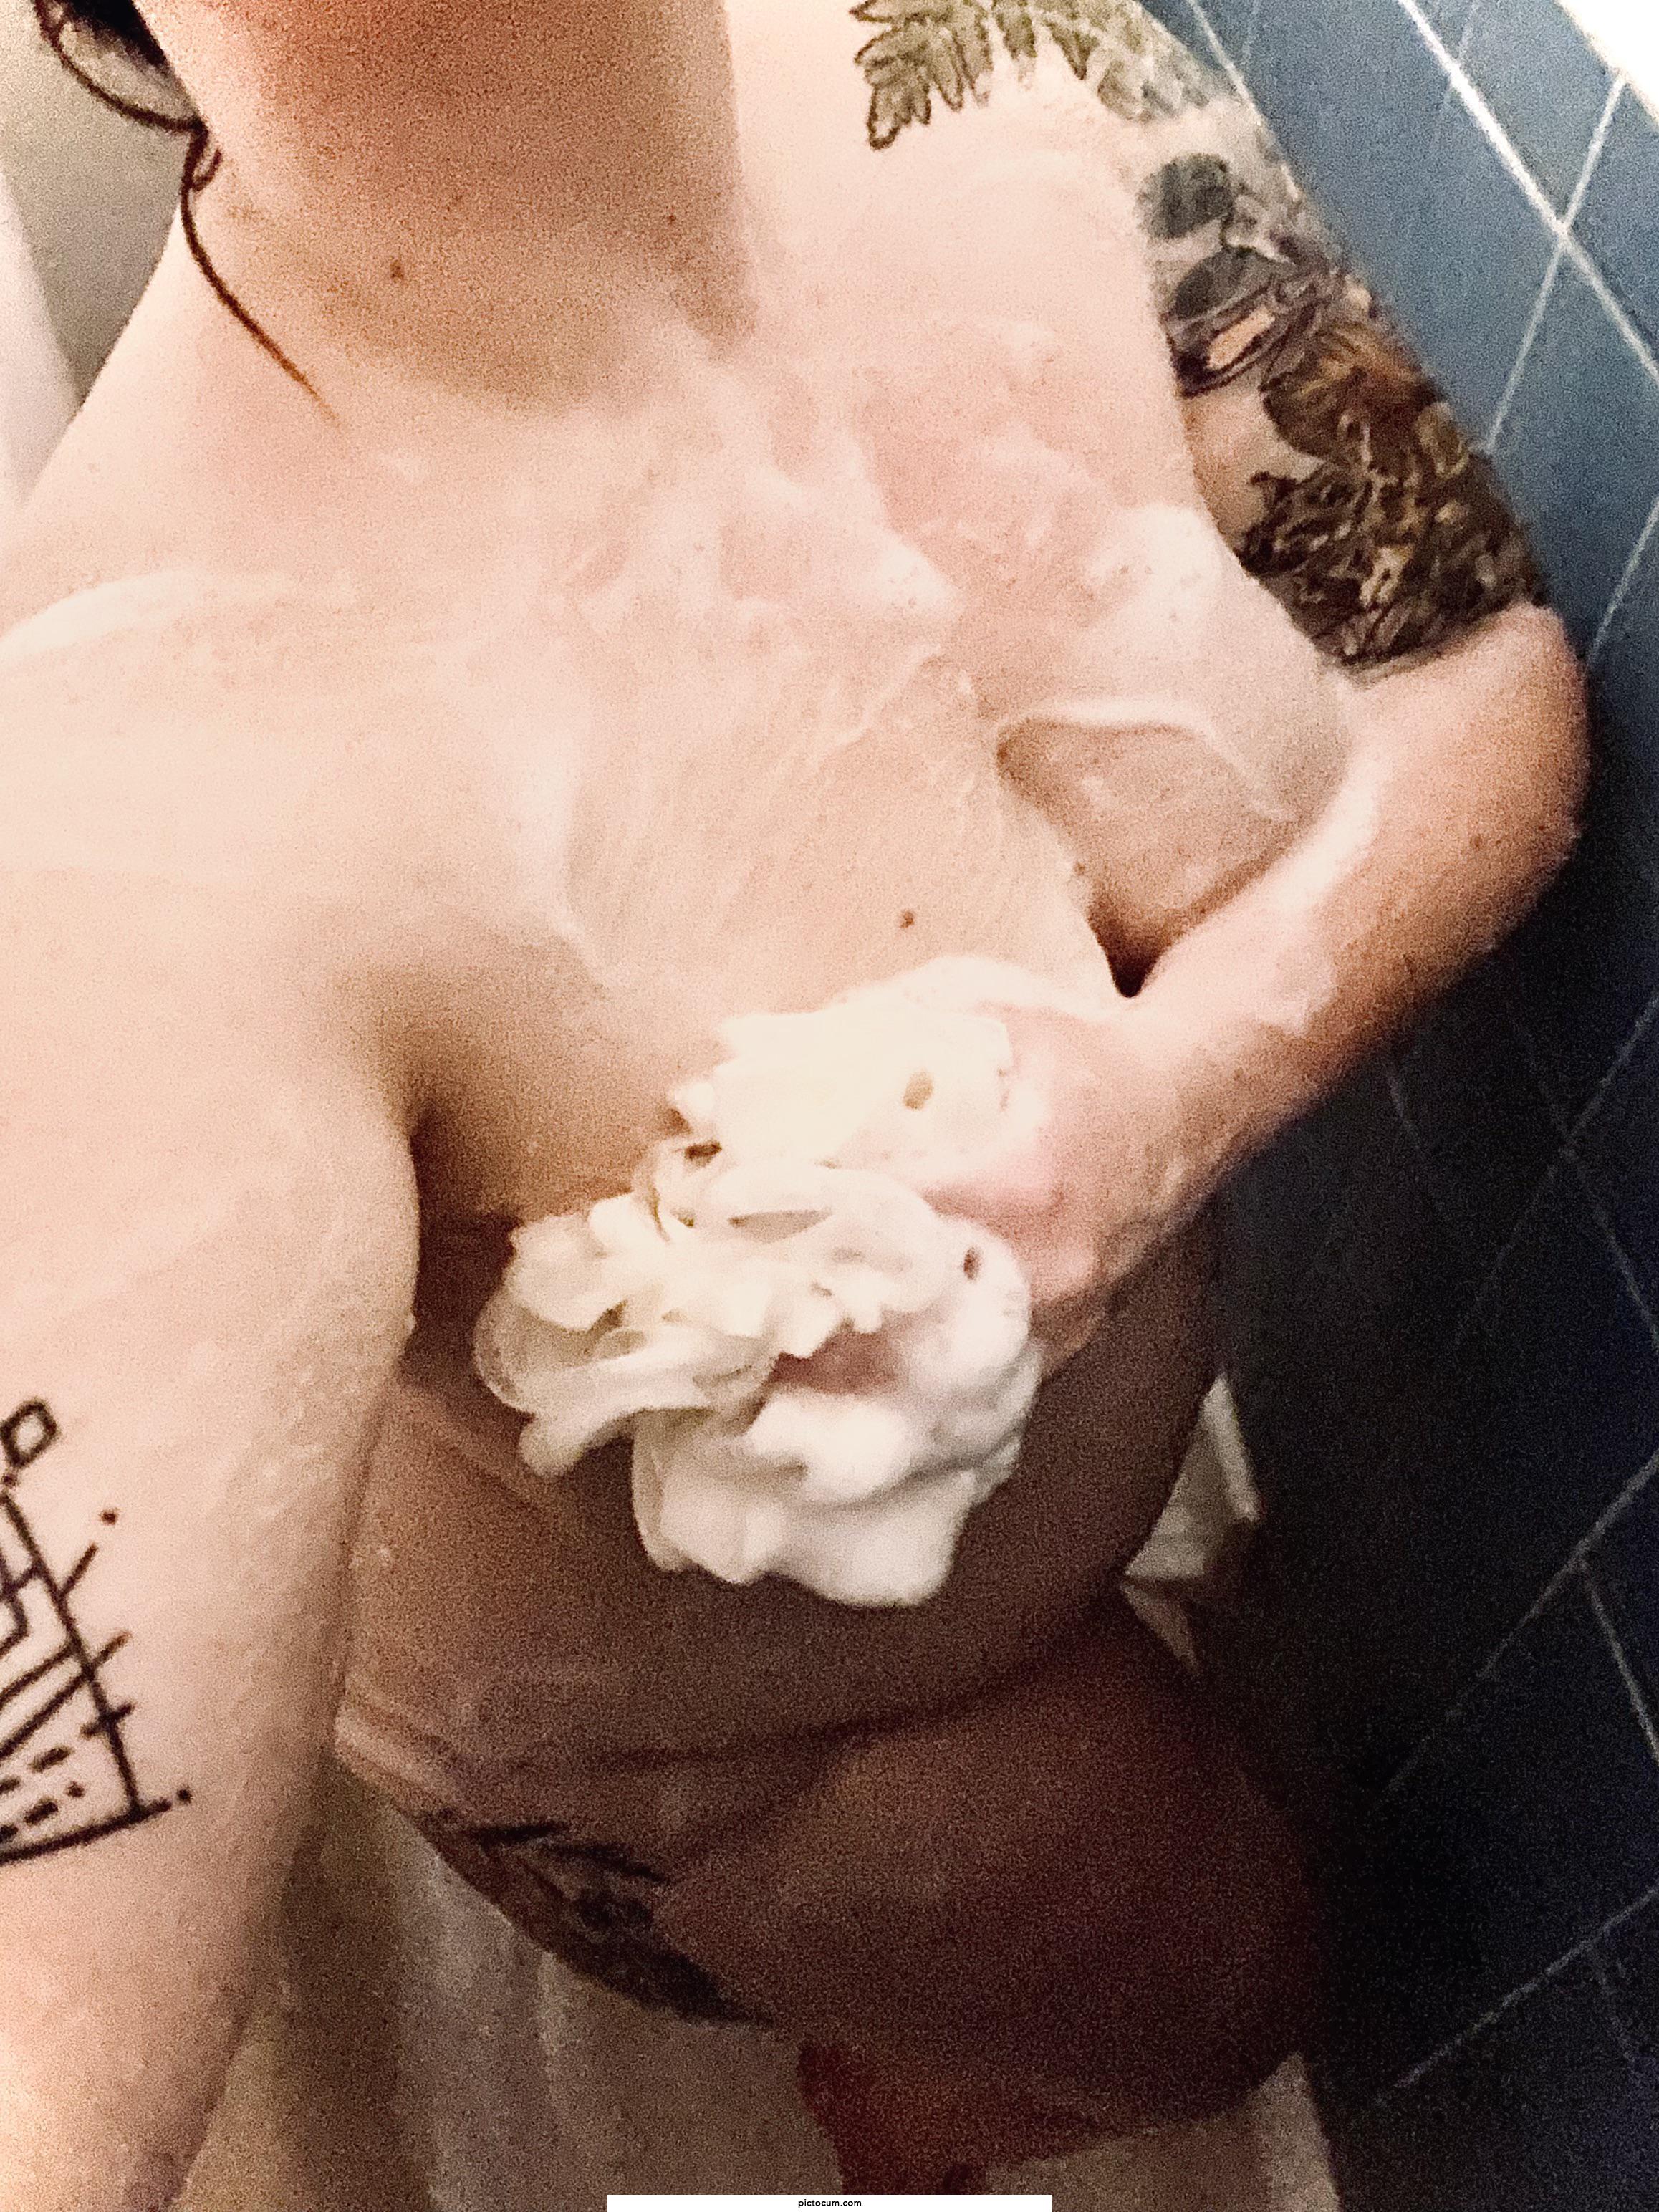 Want to help me get good and soapy?